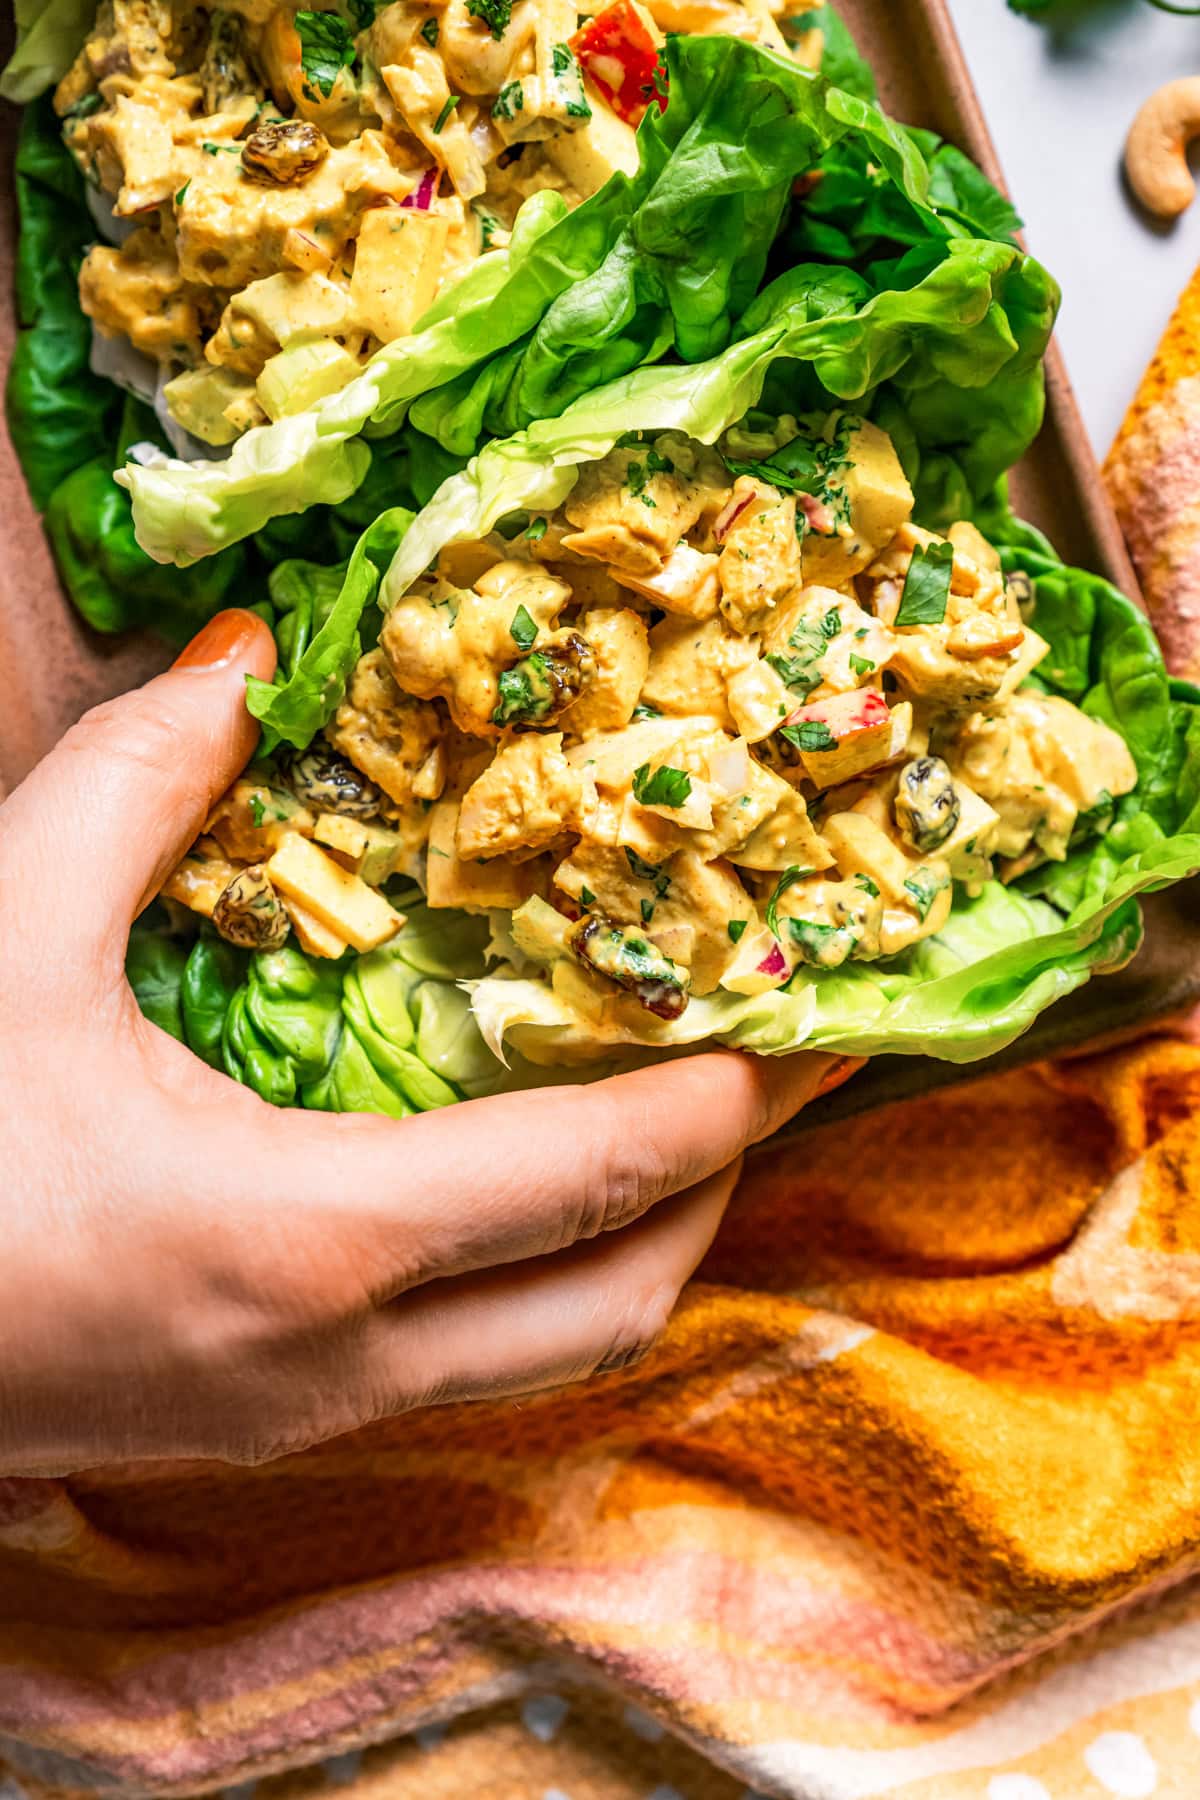 A hand picking up a curry chicken salad lettuce wrap.